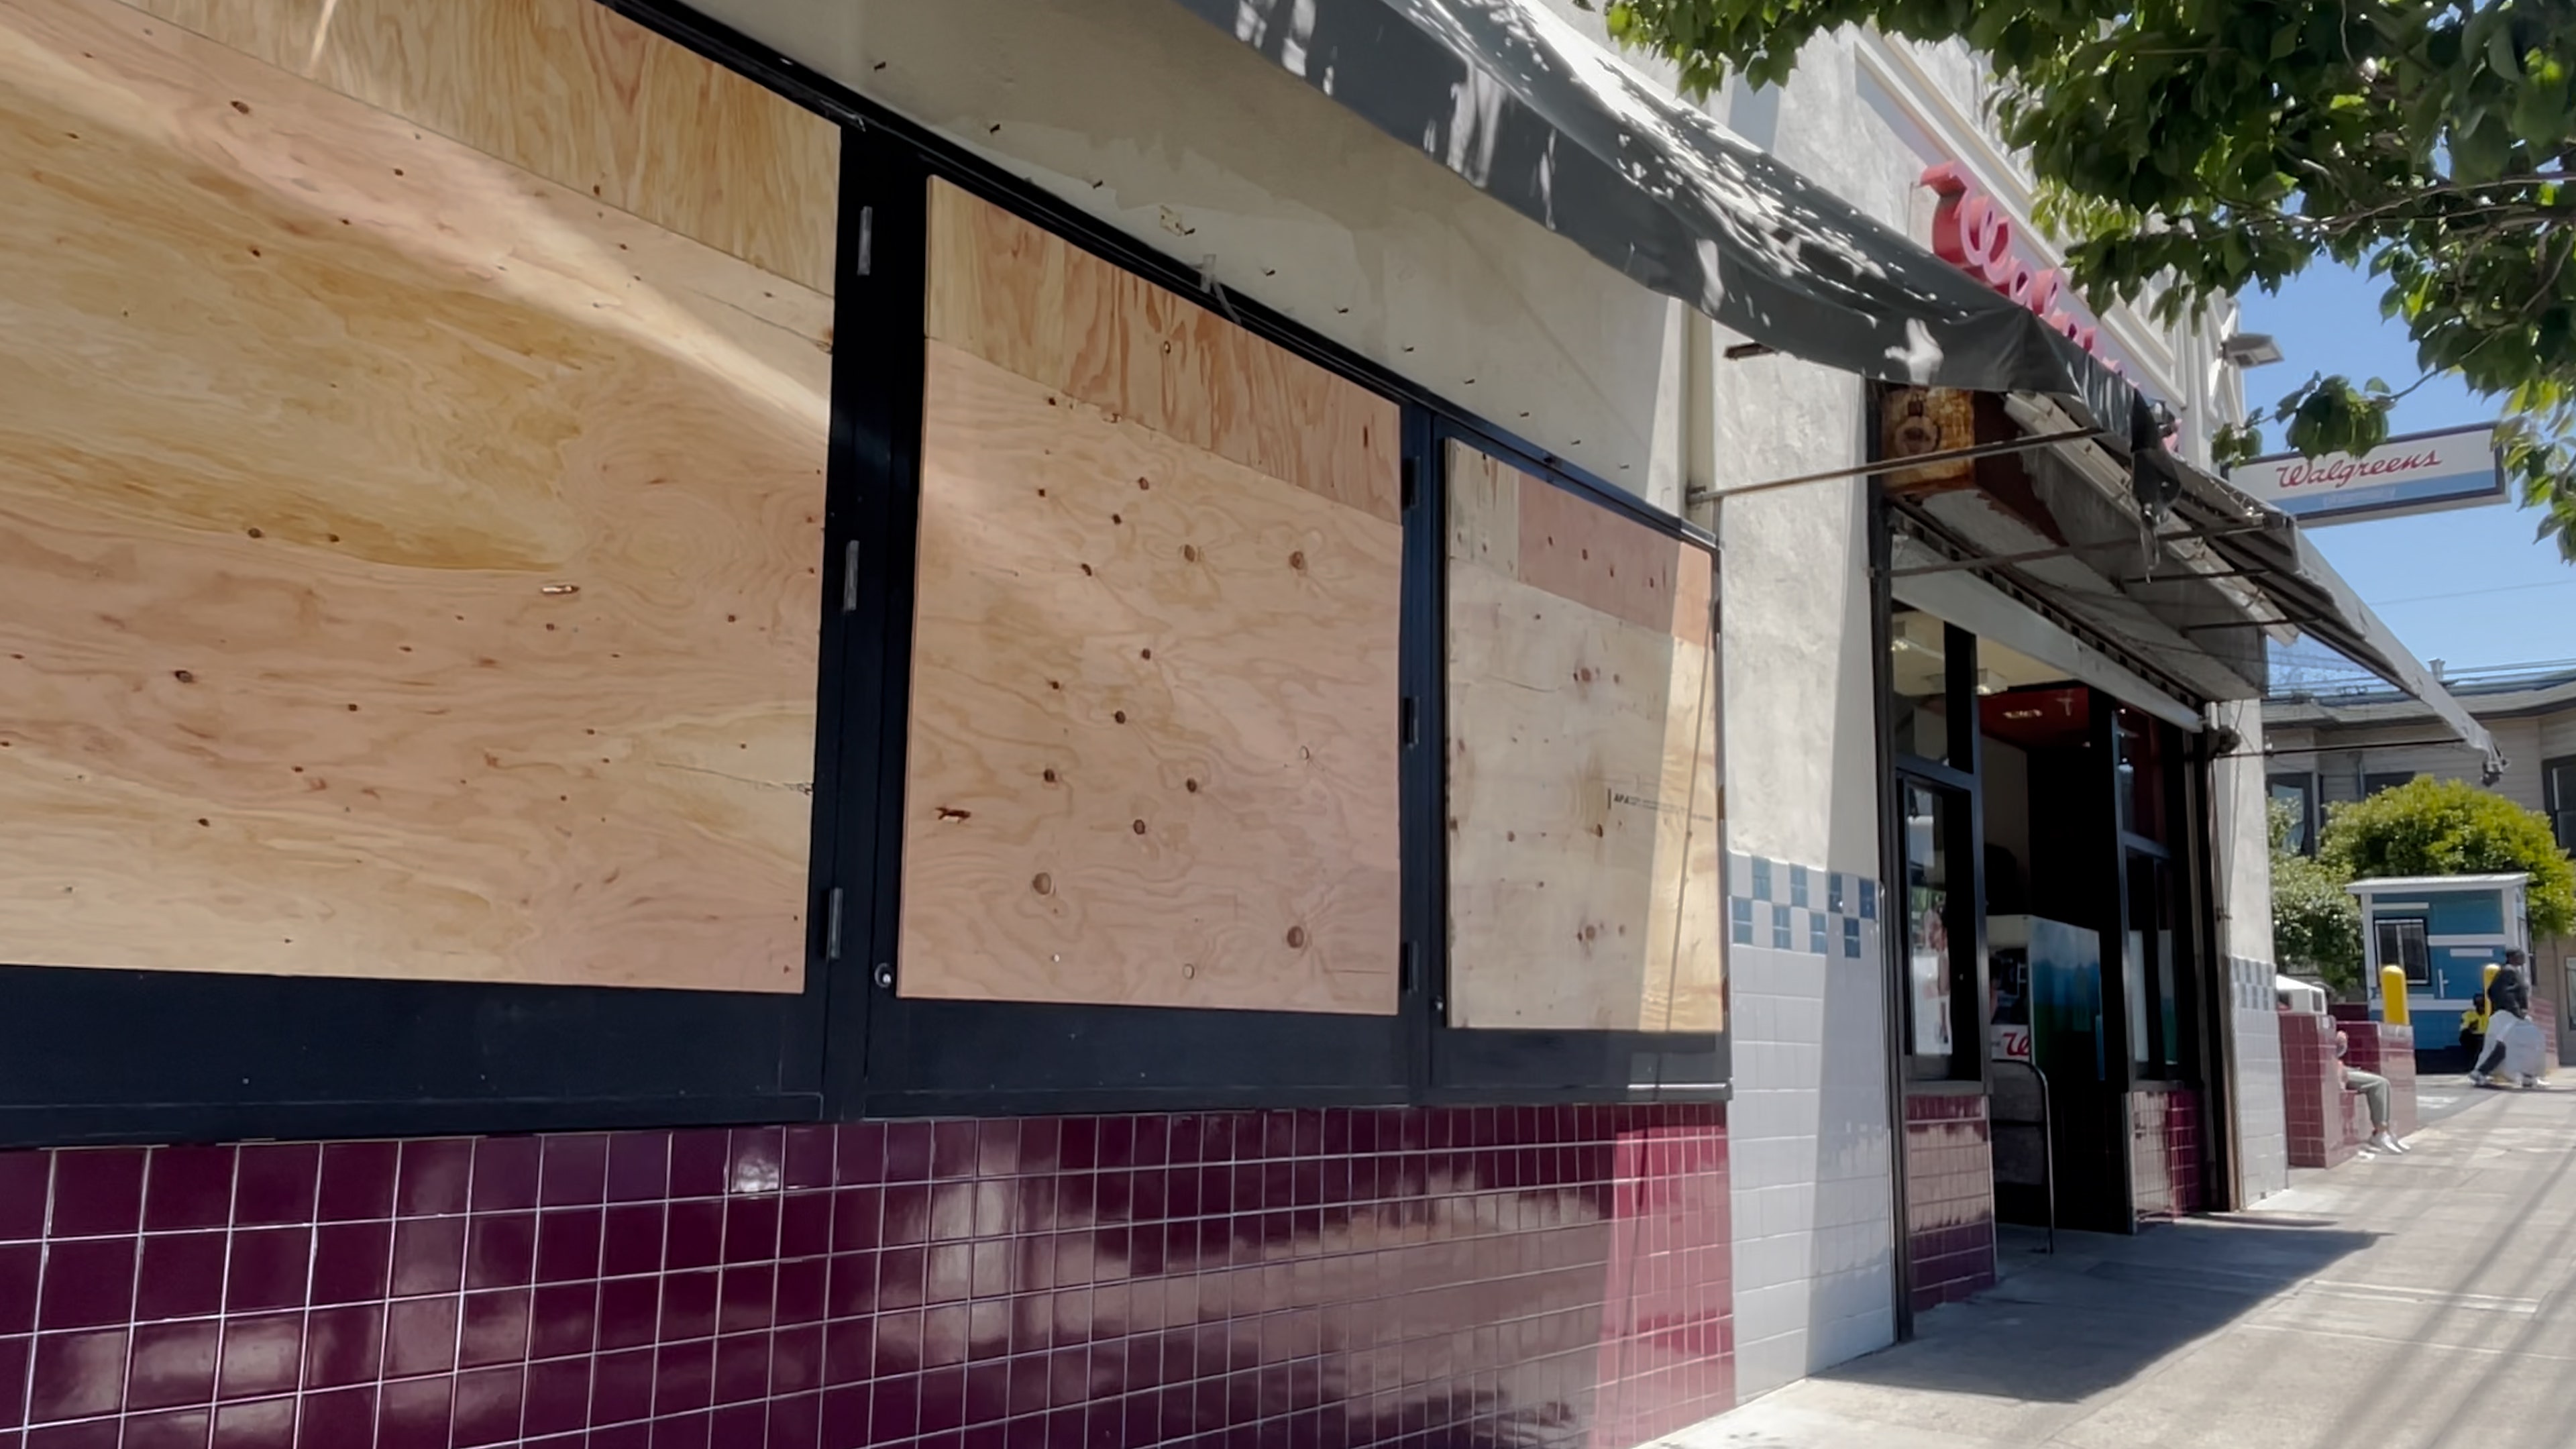 A San Francisco Walgreens drug store with boarded up windows